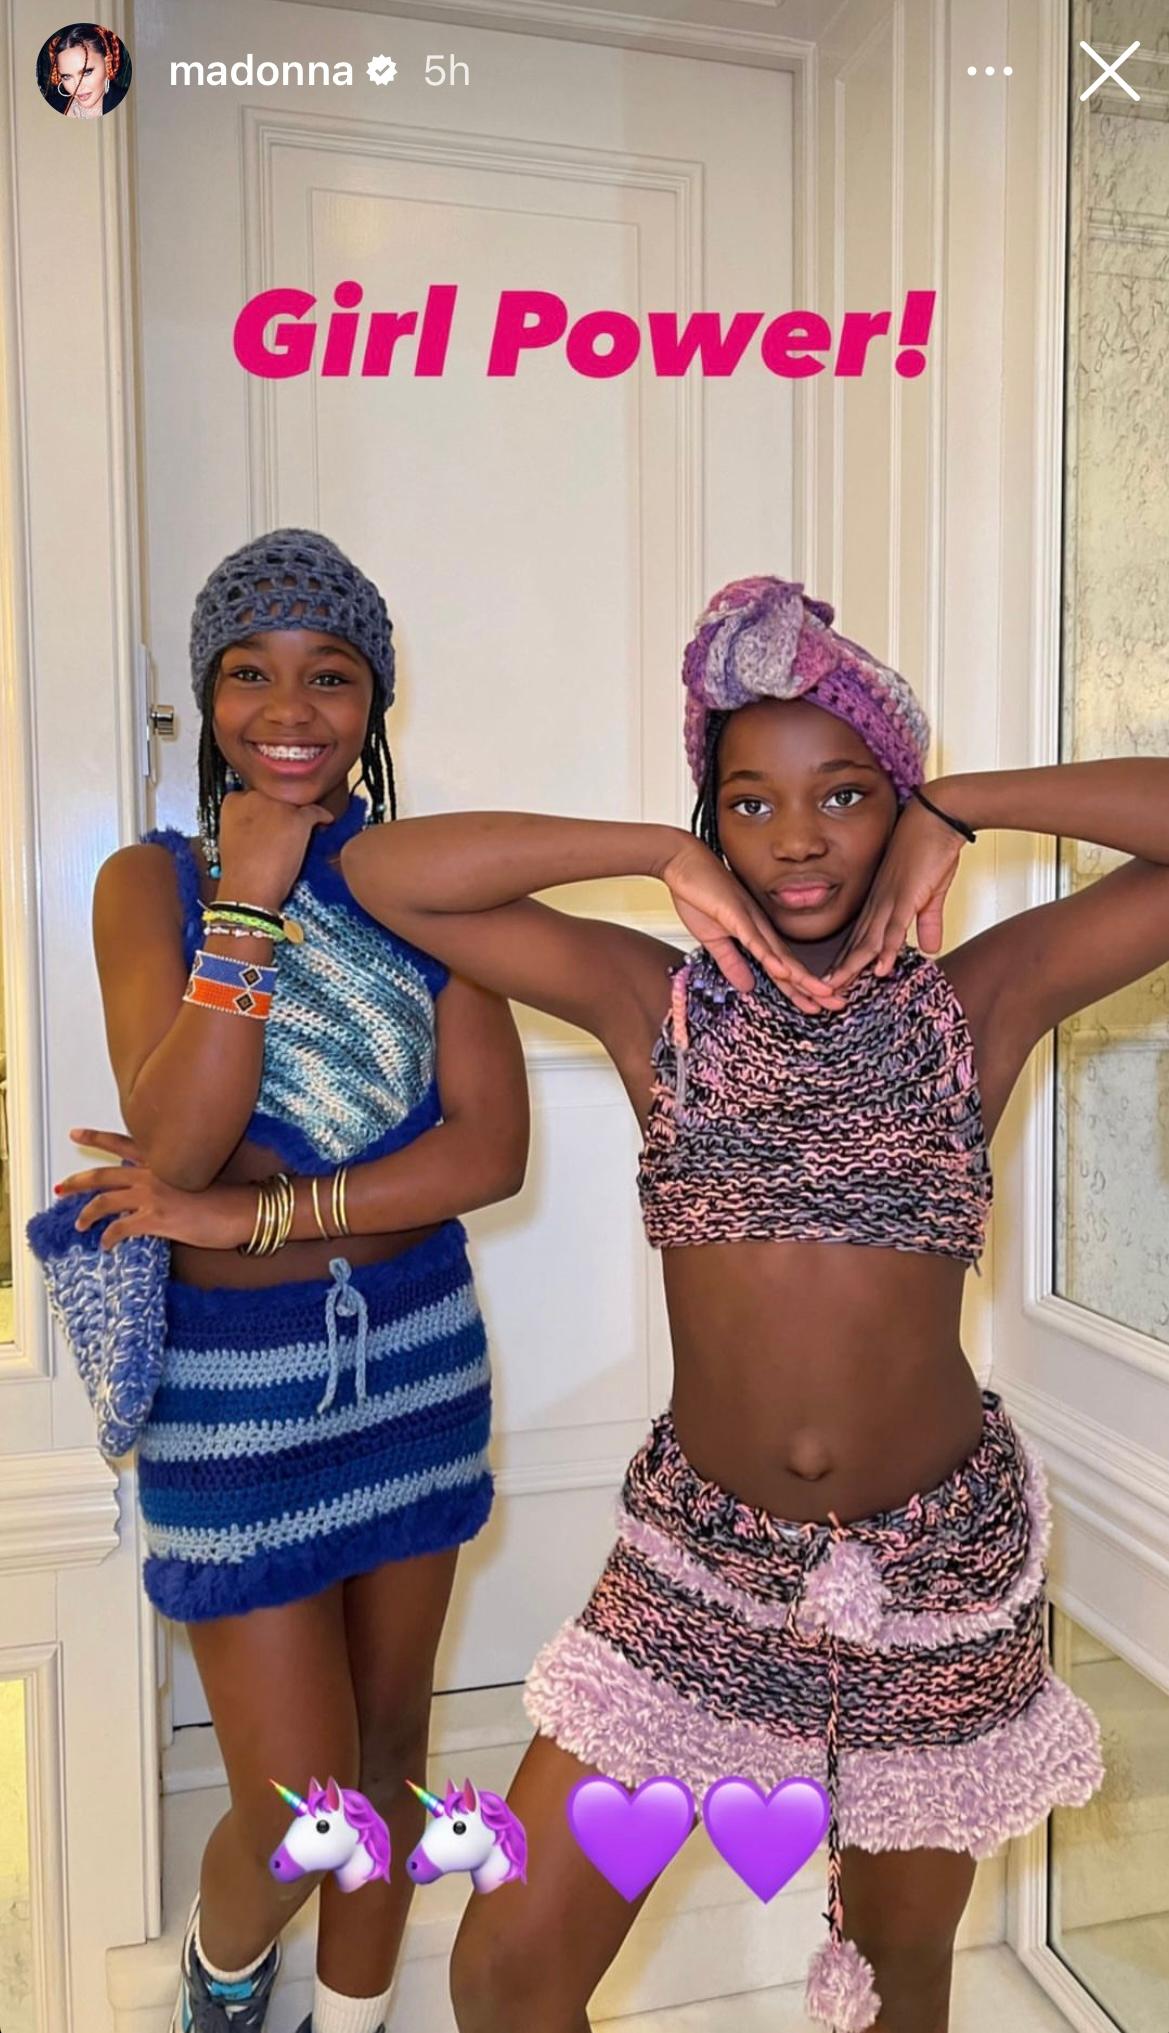 Madonna's twin daughters Estere and Stella look grown as they flaunt crotchet skills